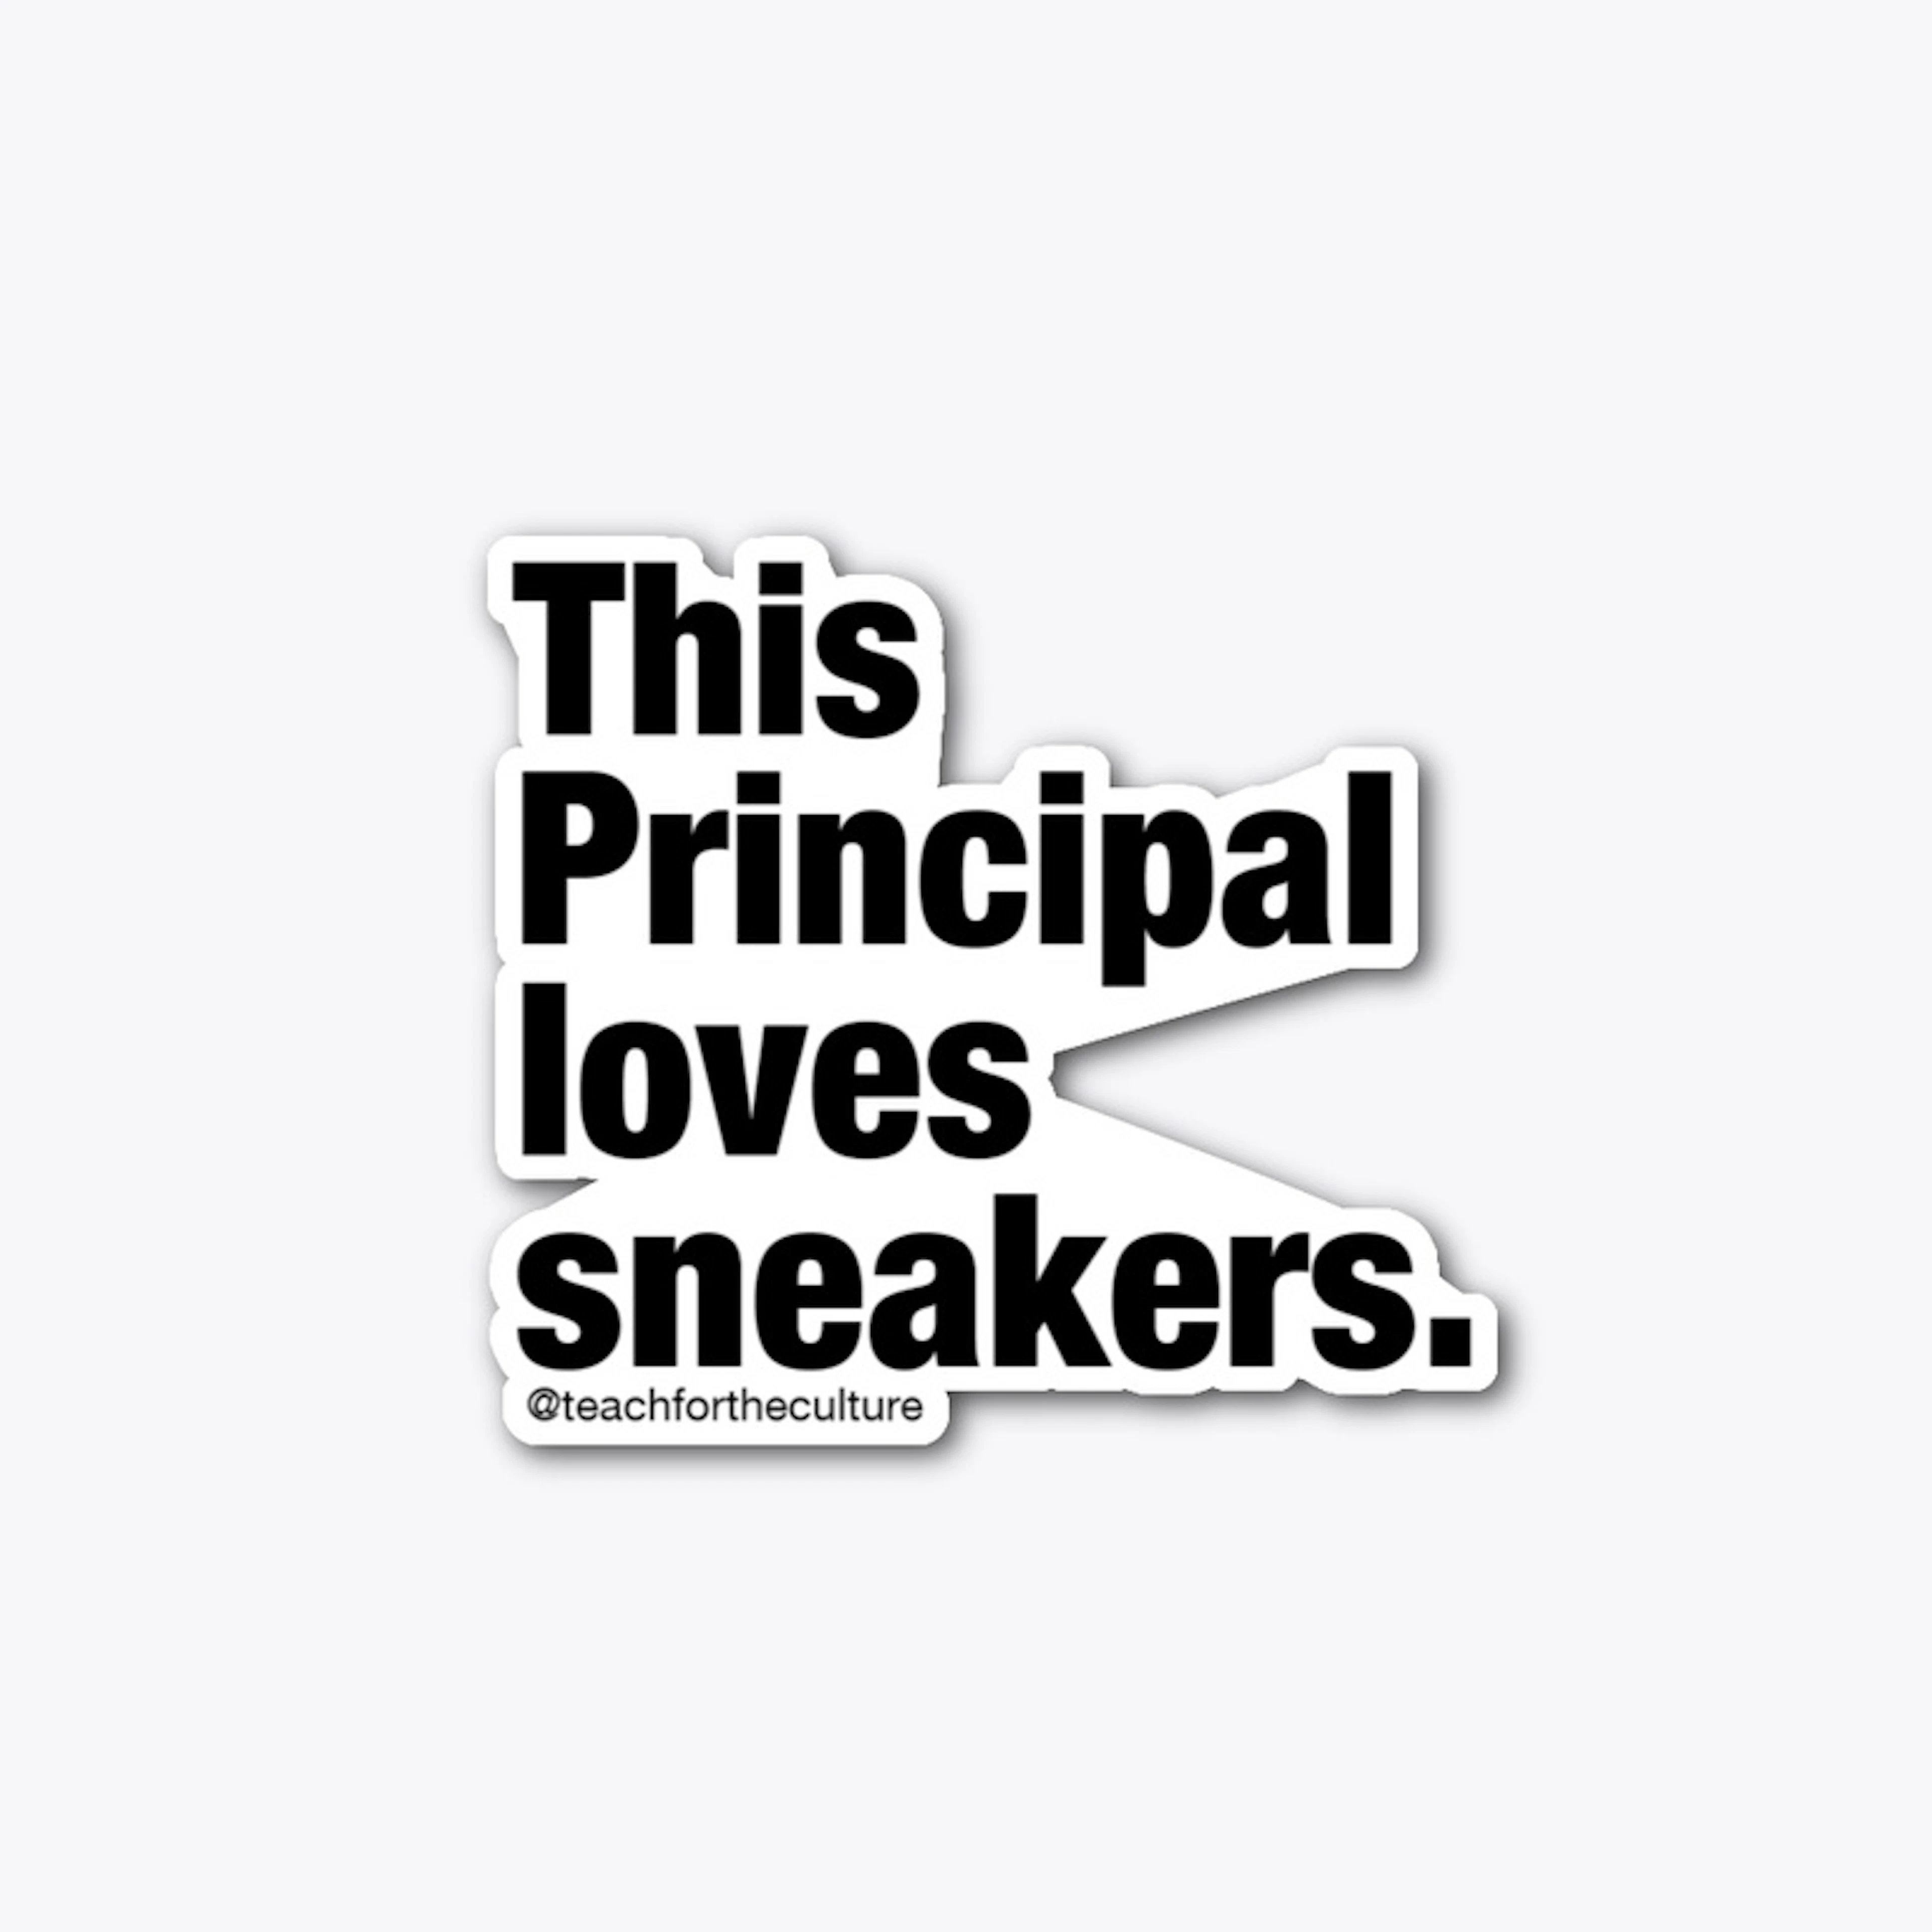 This PRINCIPAL loves stickers. - sticker